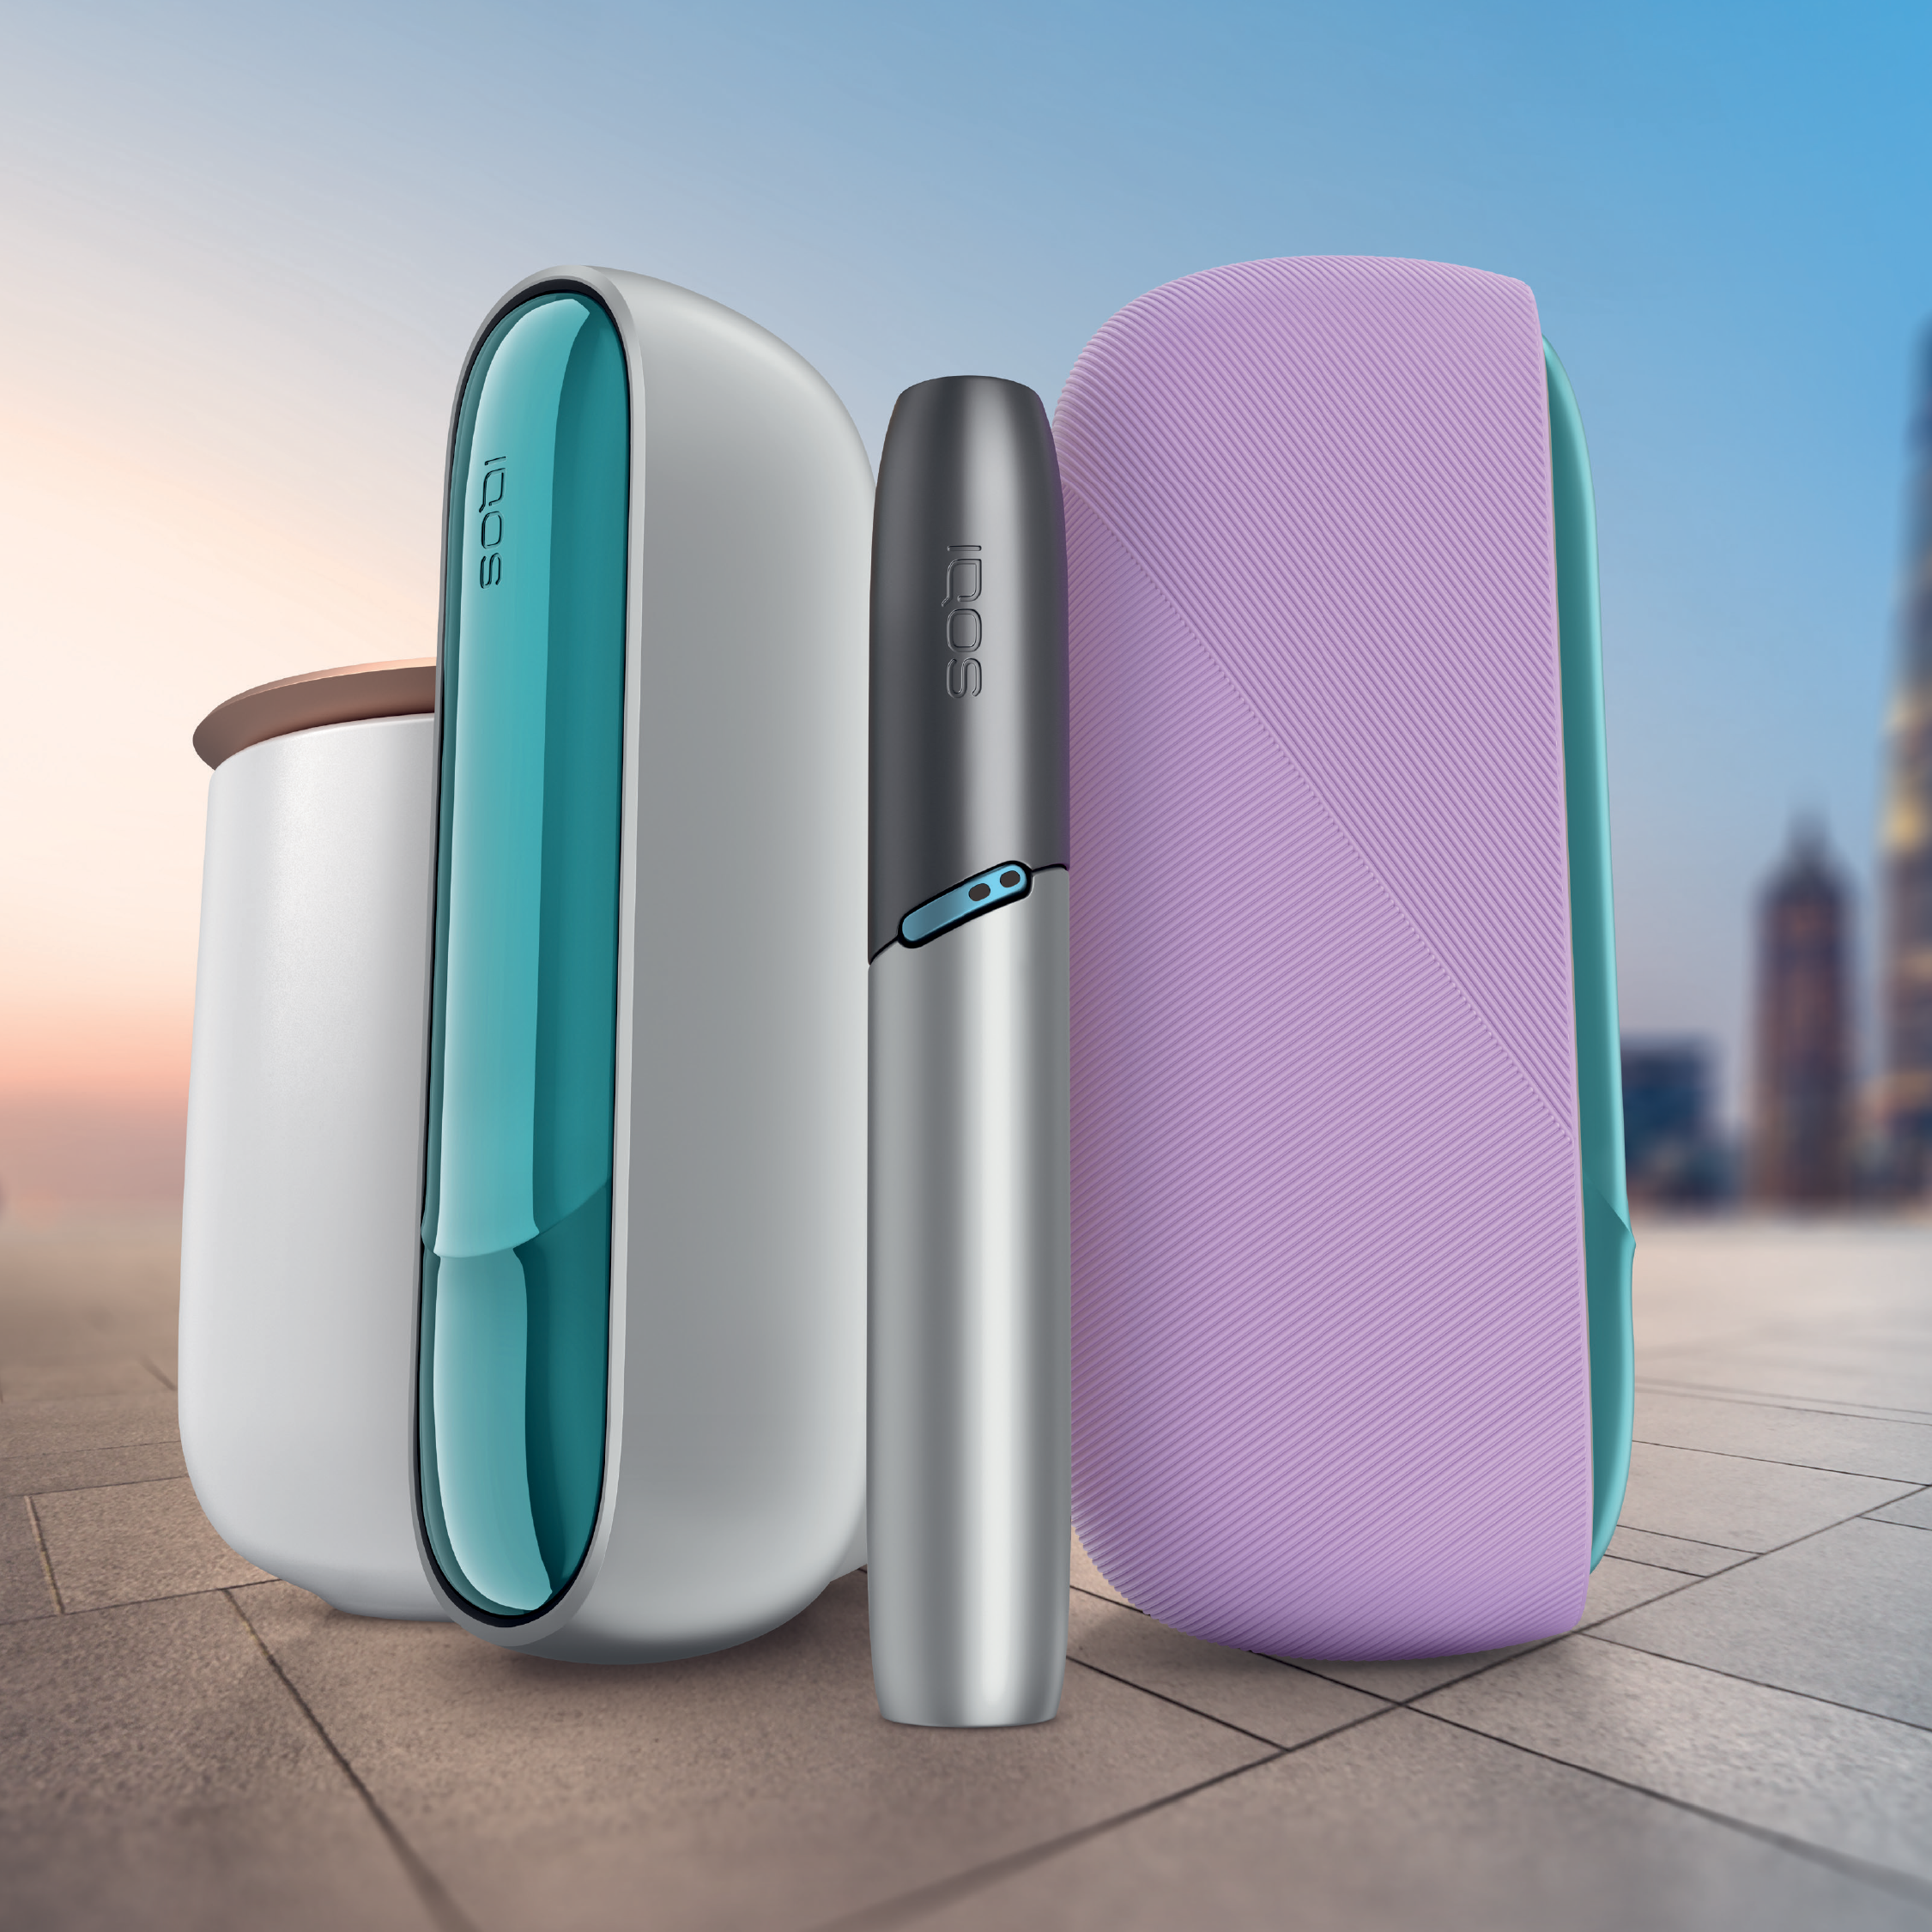 https://www.iqos.com/vanity/content/dam/iqos/local/indonesia/en/home/news/News_2251x2251_5.png/News_2251x2251_5.T1665078624637.V7226463000_244481_911_4202.png